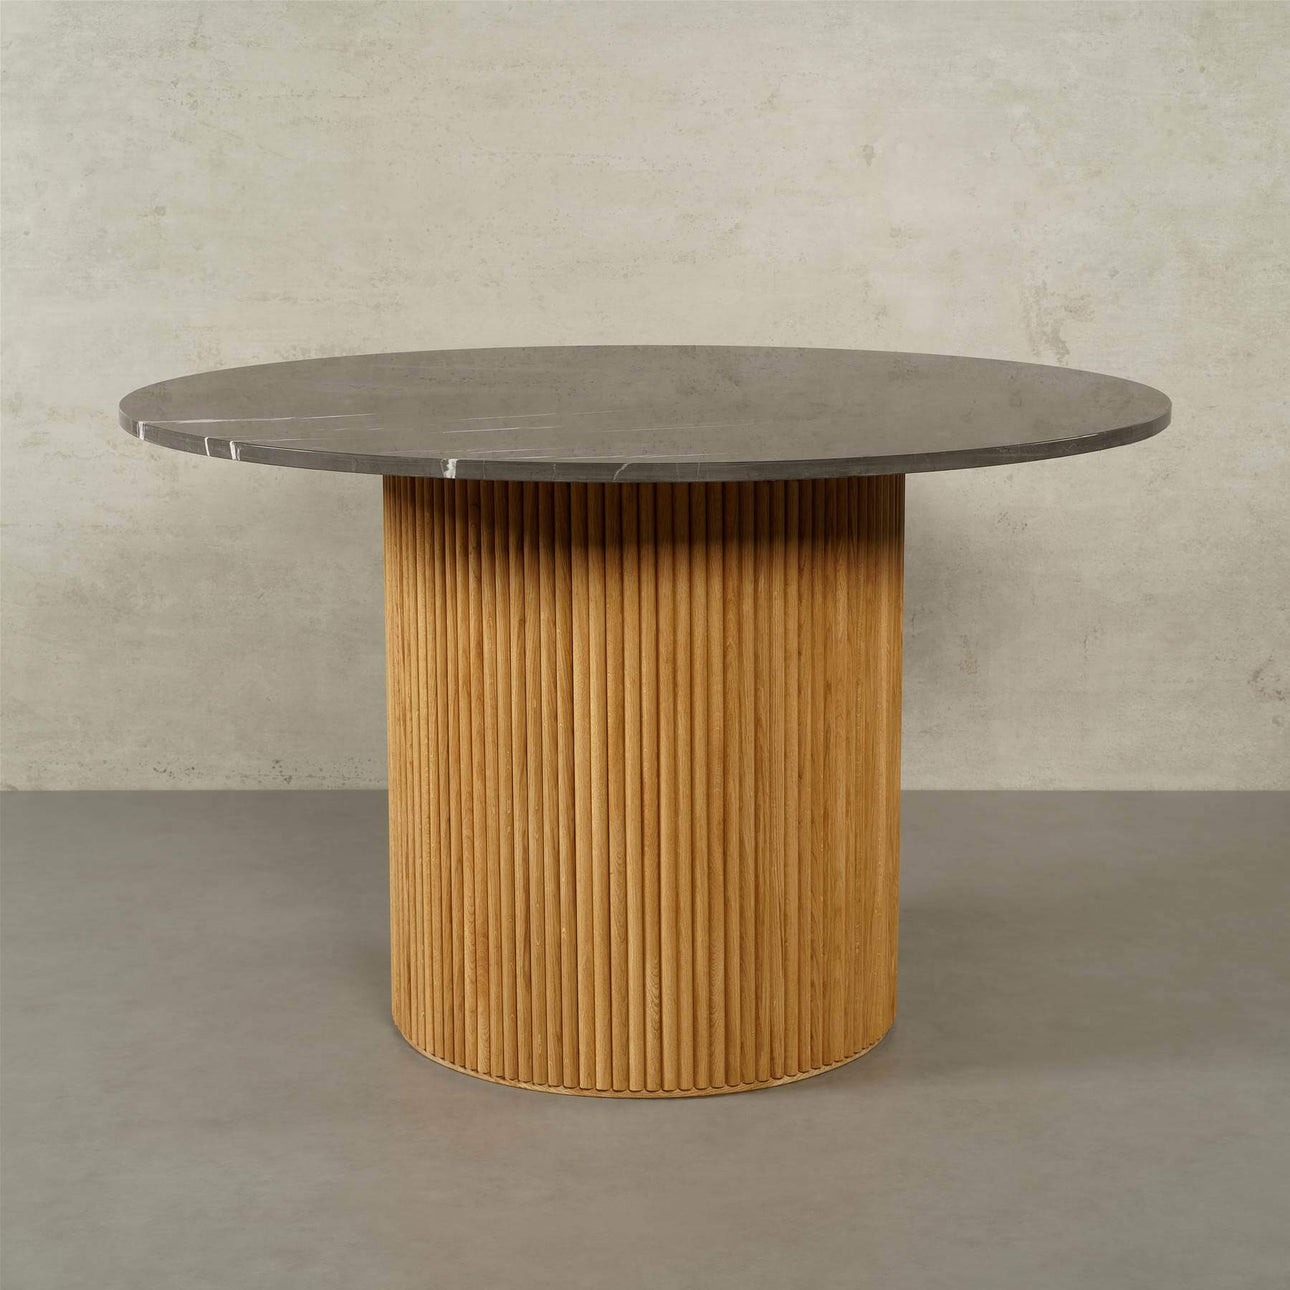 Victoria marble dining table